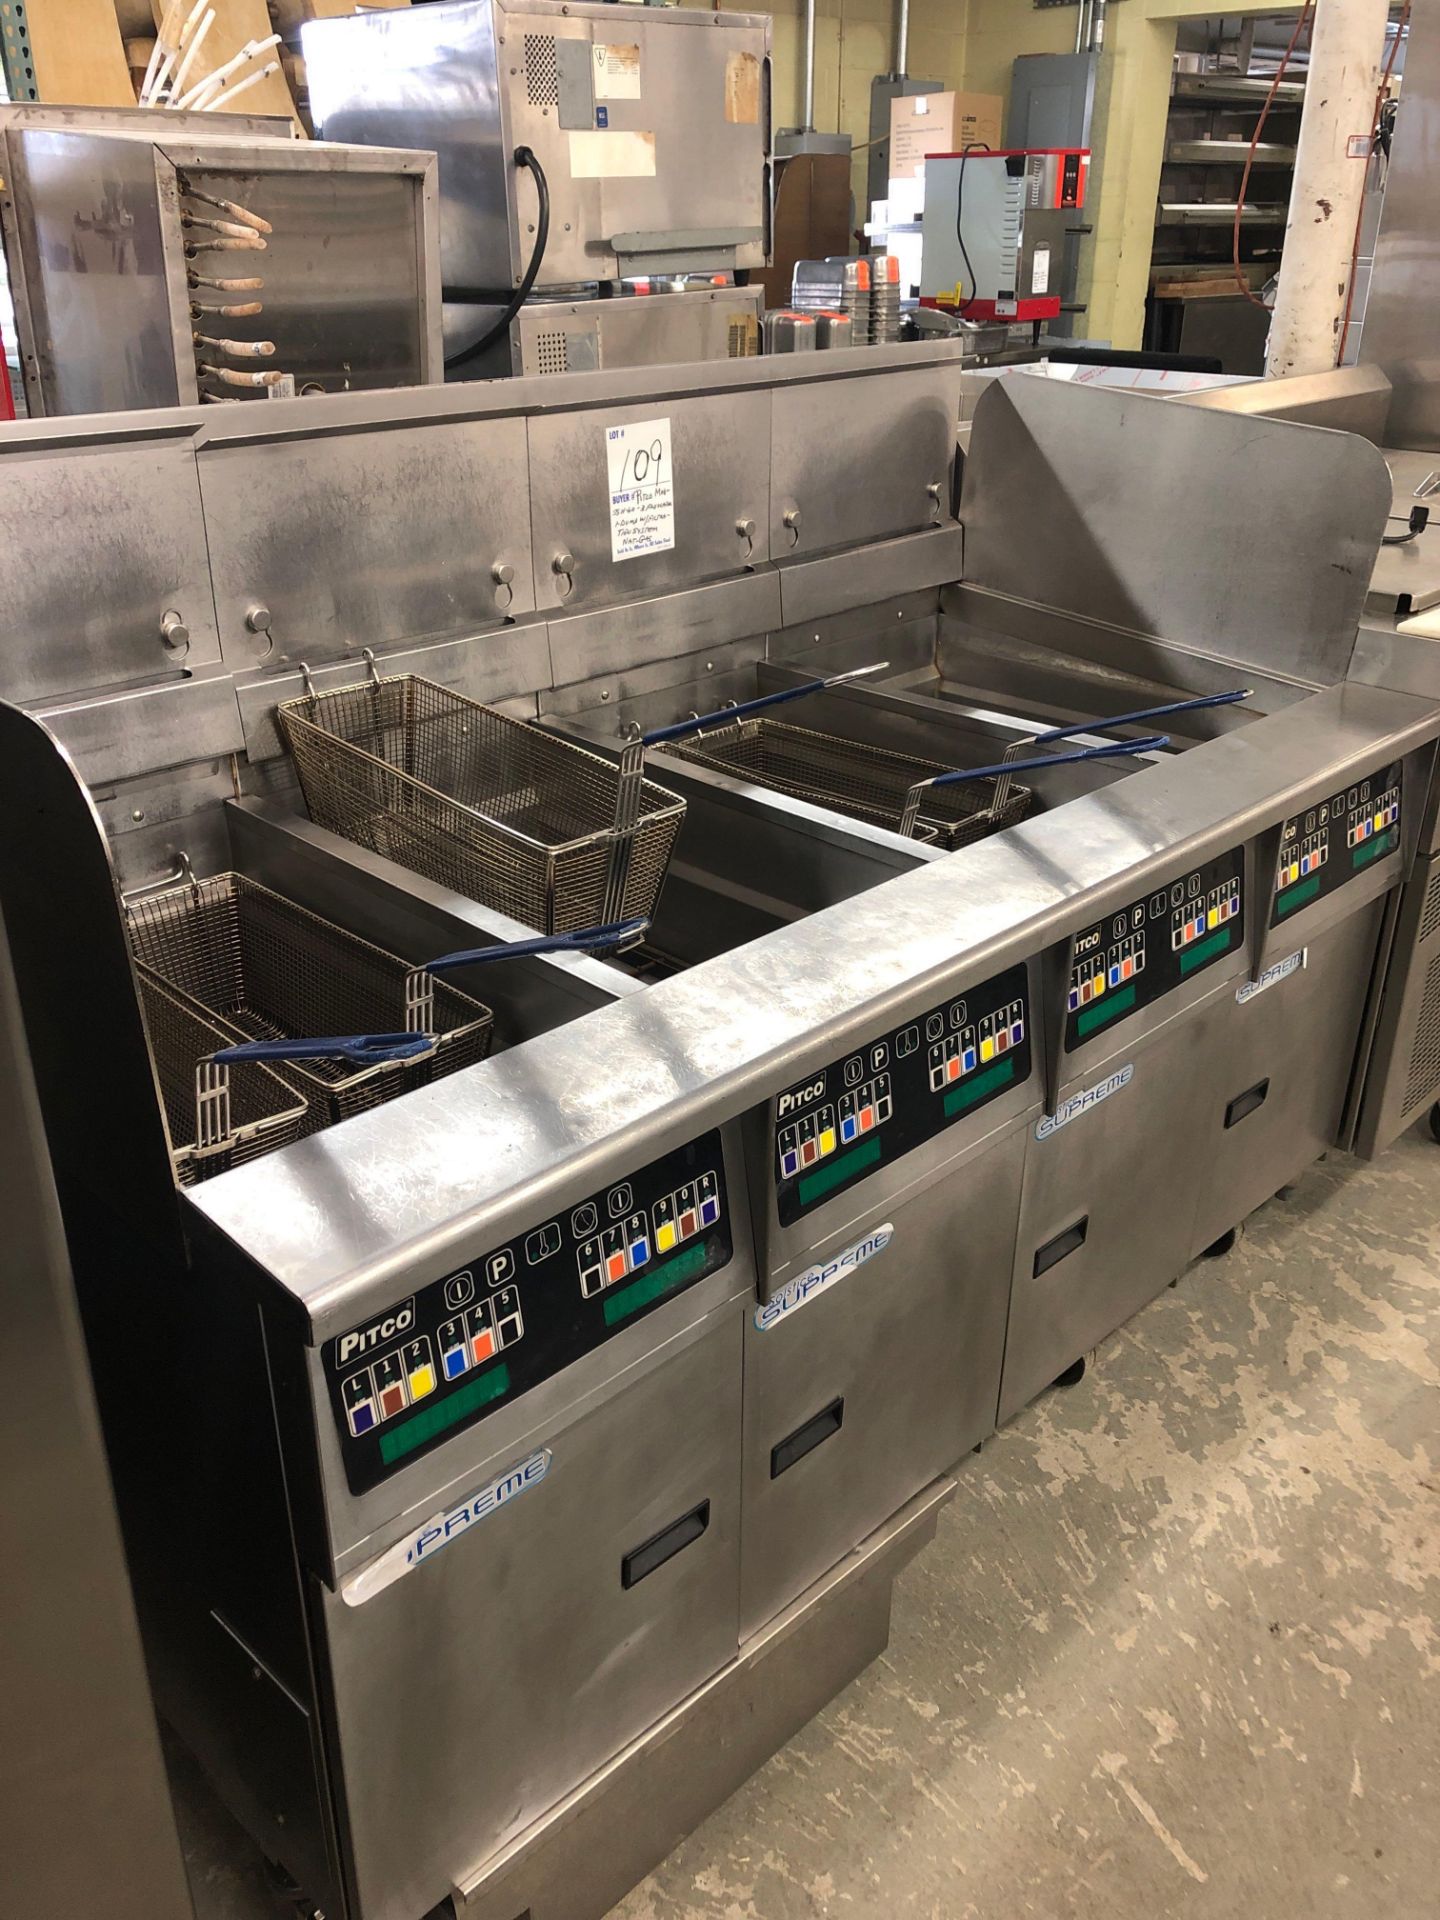 Pitco 4 section fryer with filtration system